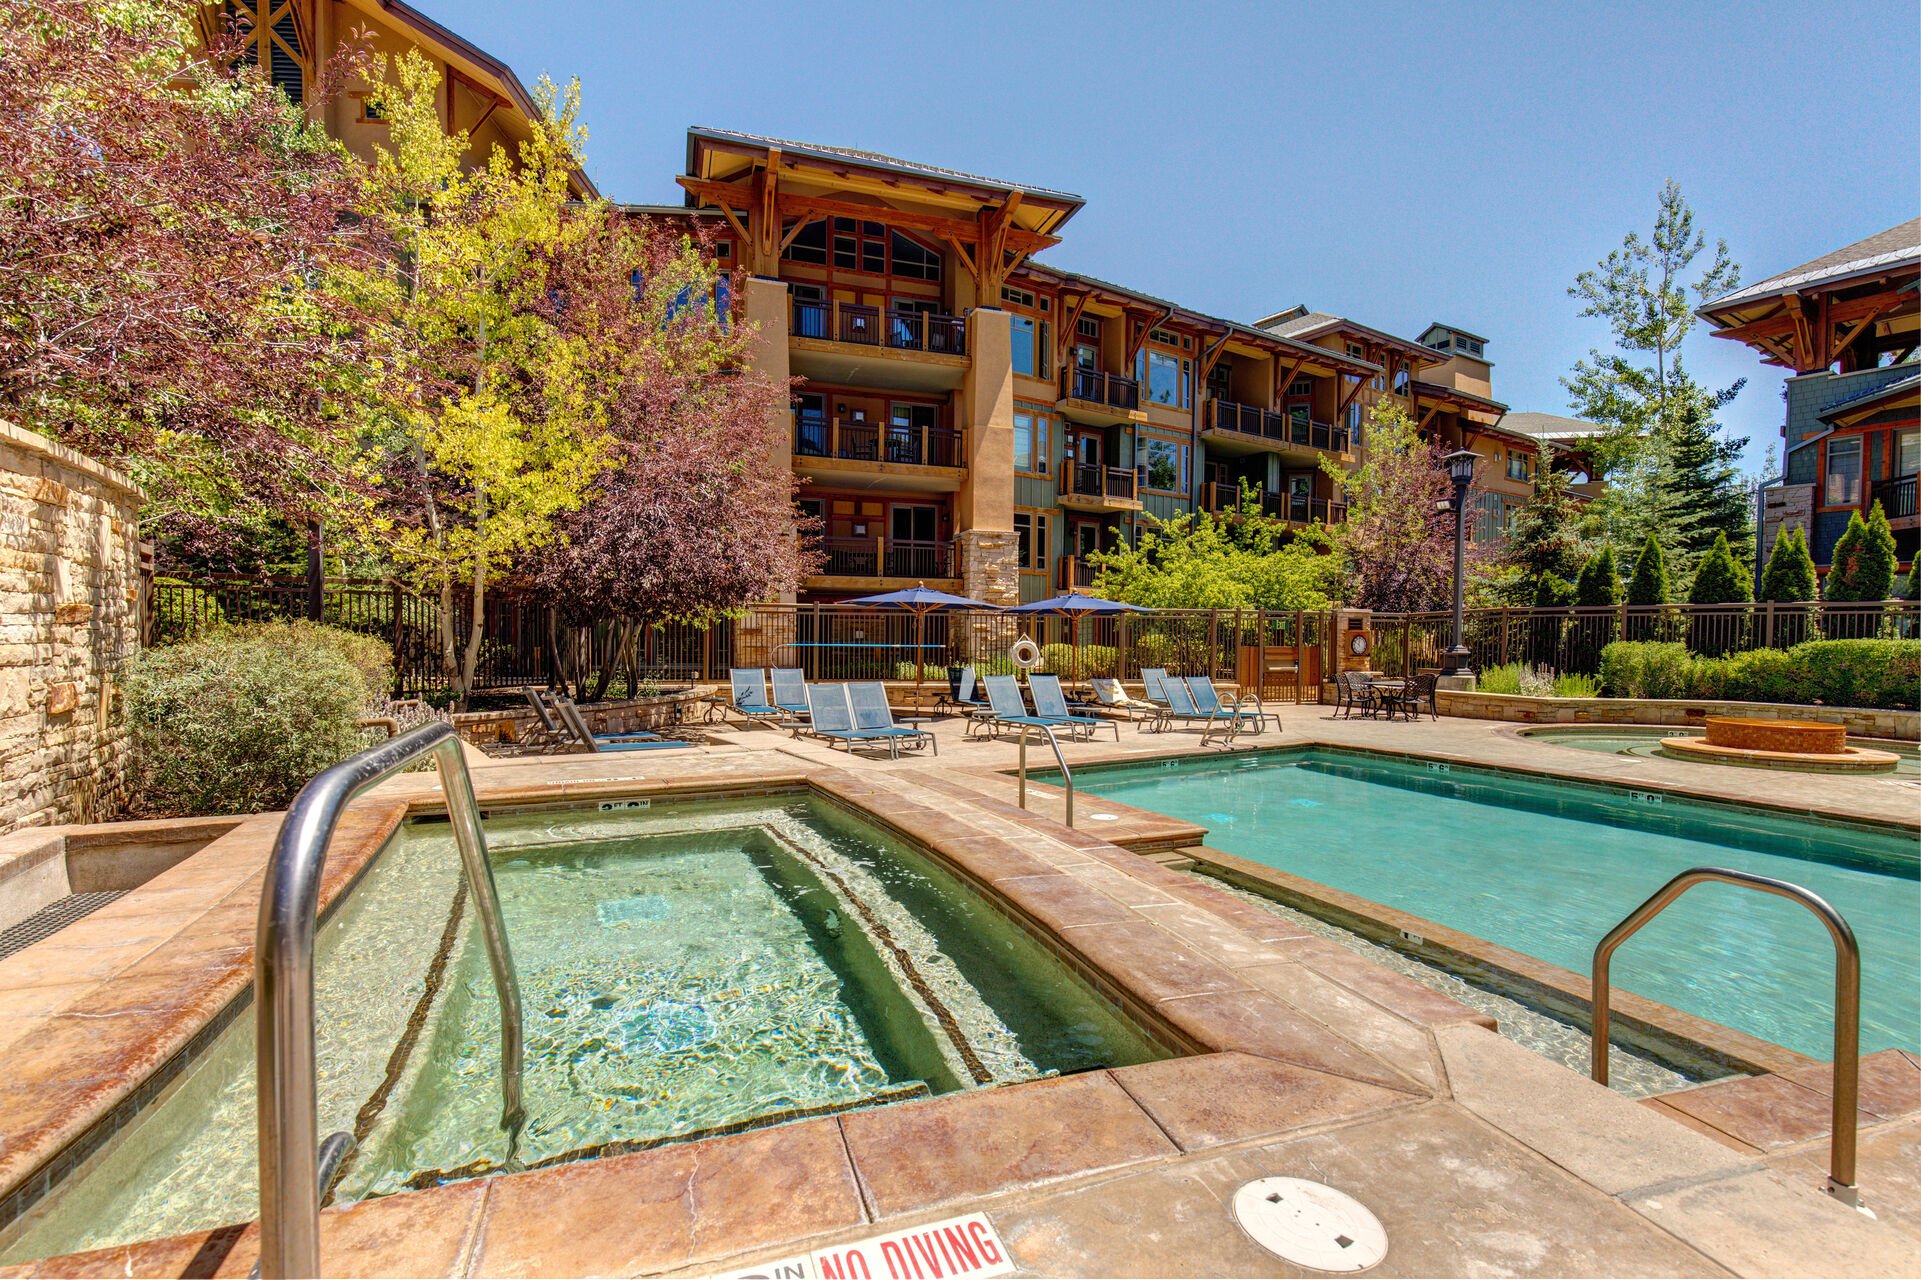 Communal heated pool and multiple hot tubs